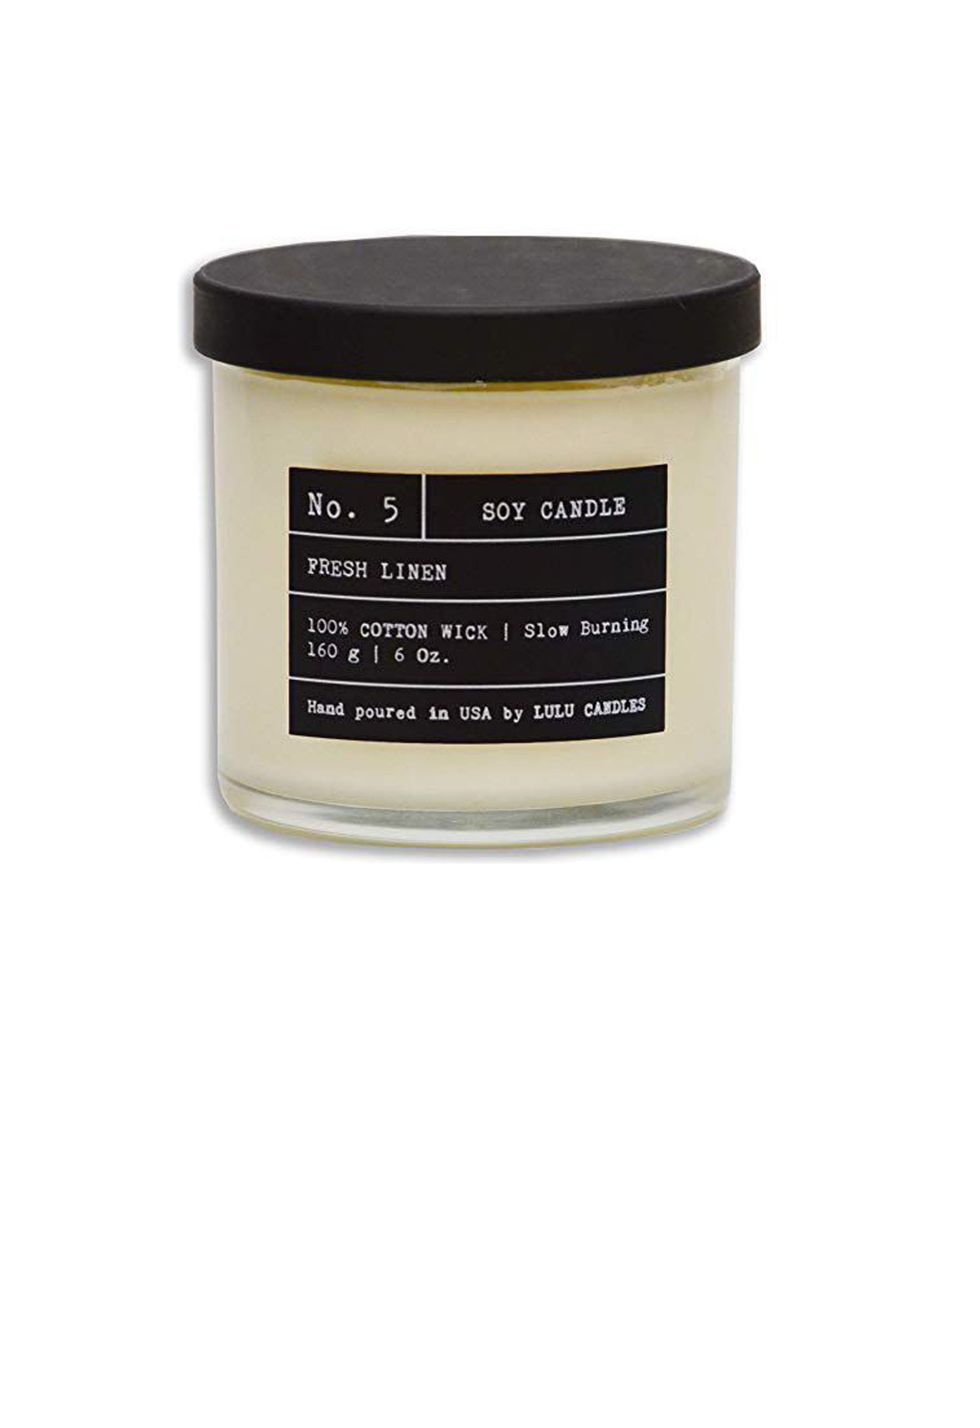 BEST CANDLE: Fresh Linen Luxury Scented Soy Candle